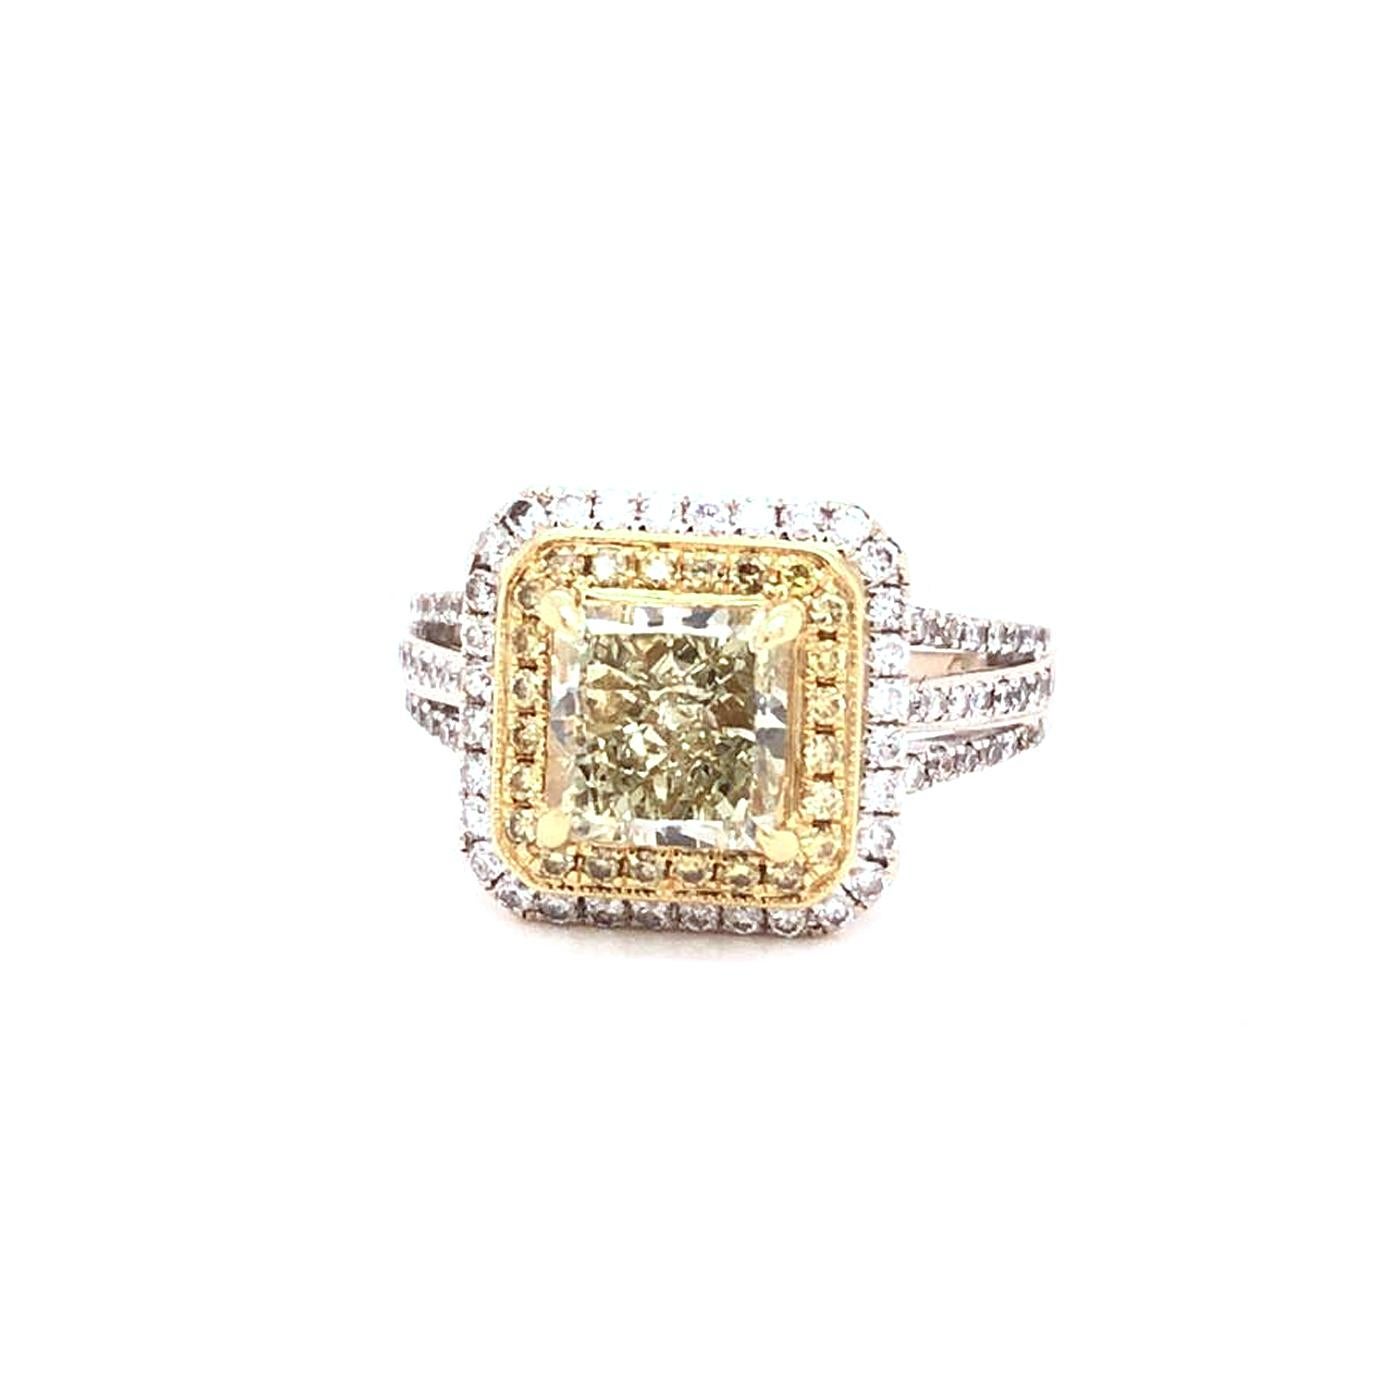 Expertly crafted 18 karats white gold ring with yellow gold accents containing a 2.02-carat prong set Radian cut brilliant natural diamond center stone with 64 pave set natural diamond side stones. The total weight of the 64 diamond side stones is